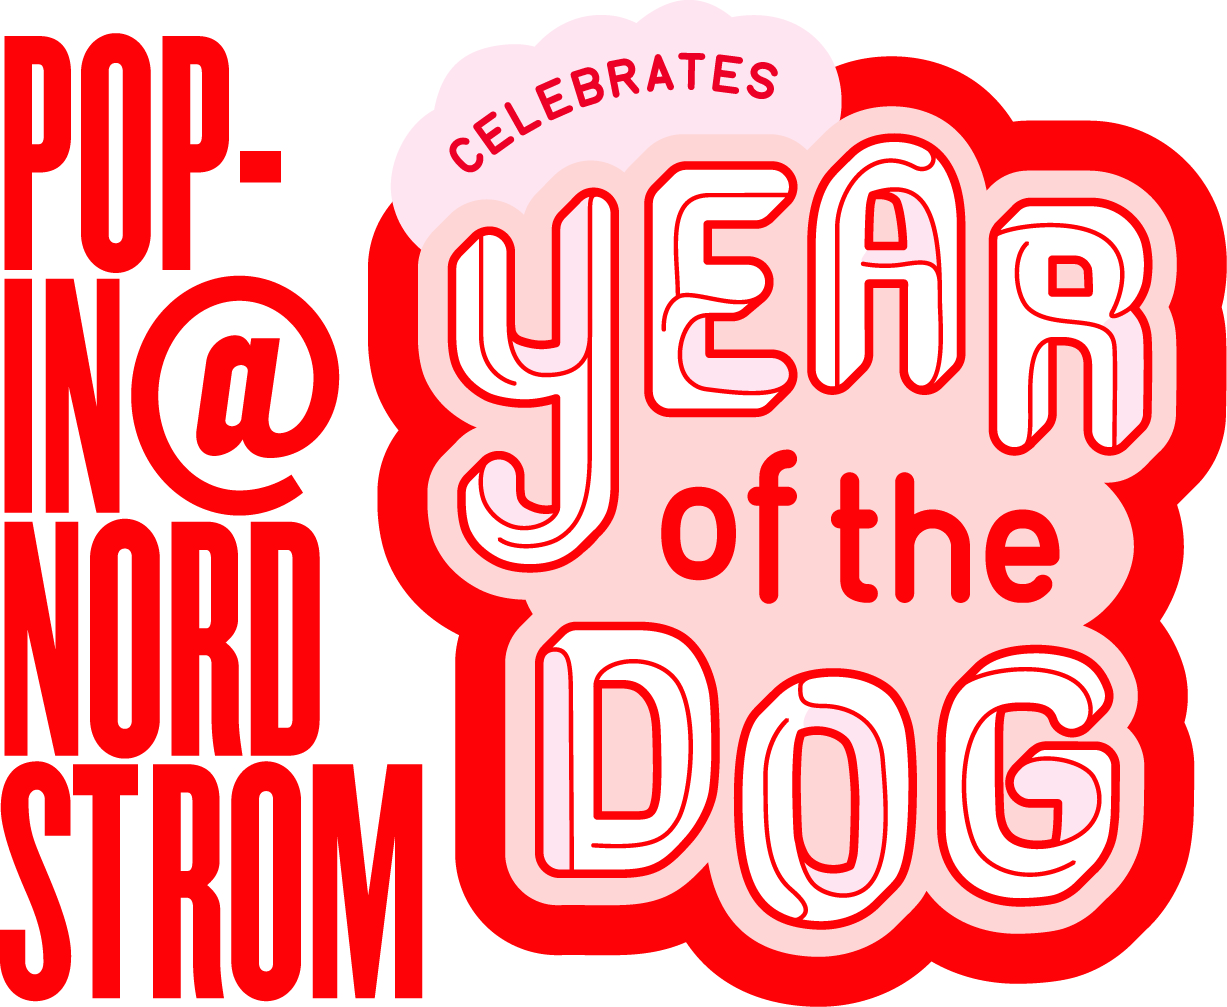 Pop-In@Nordstrom Celebrates Year of the Dog